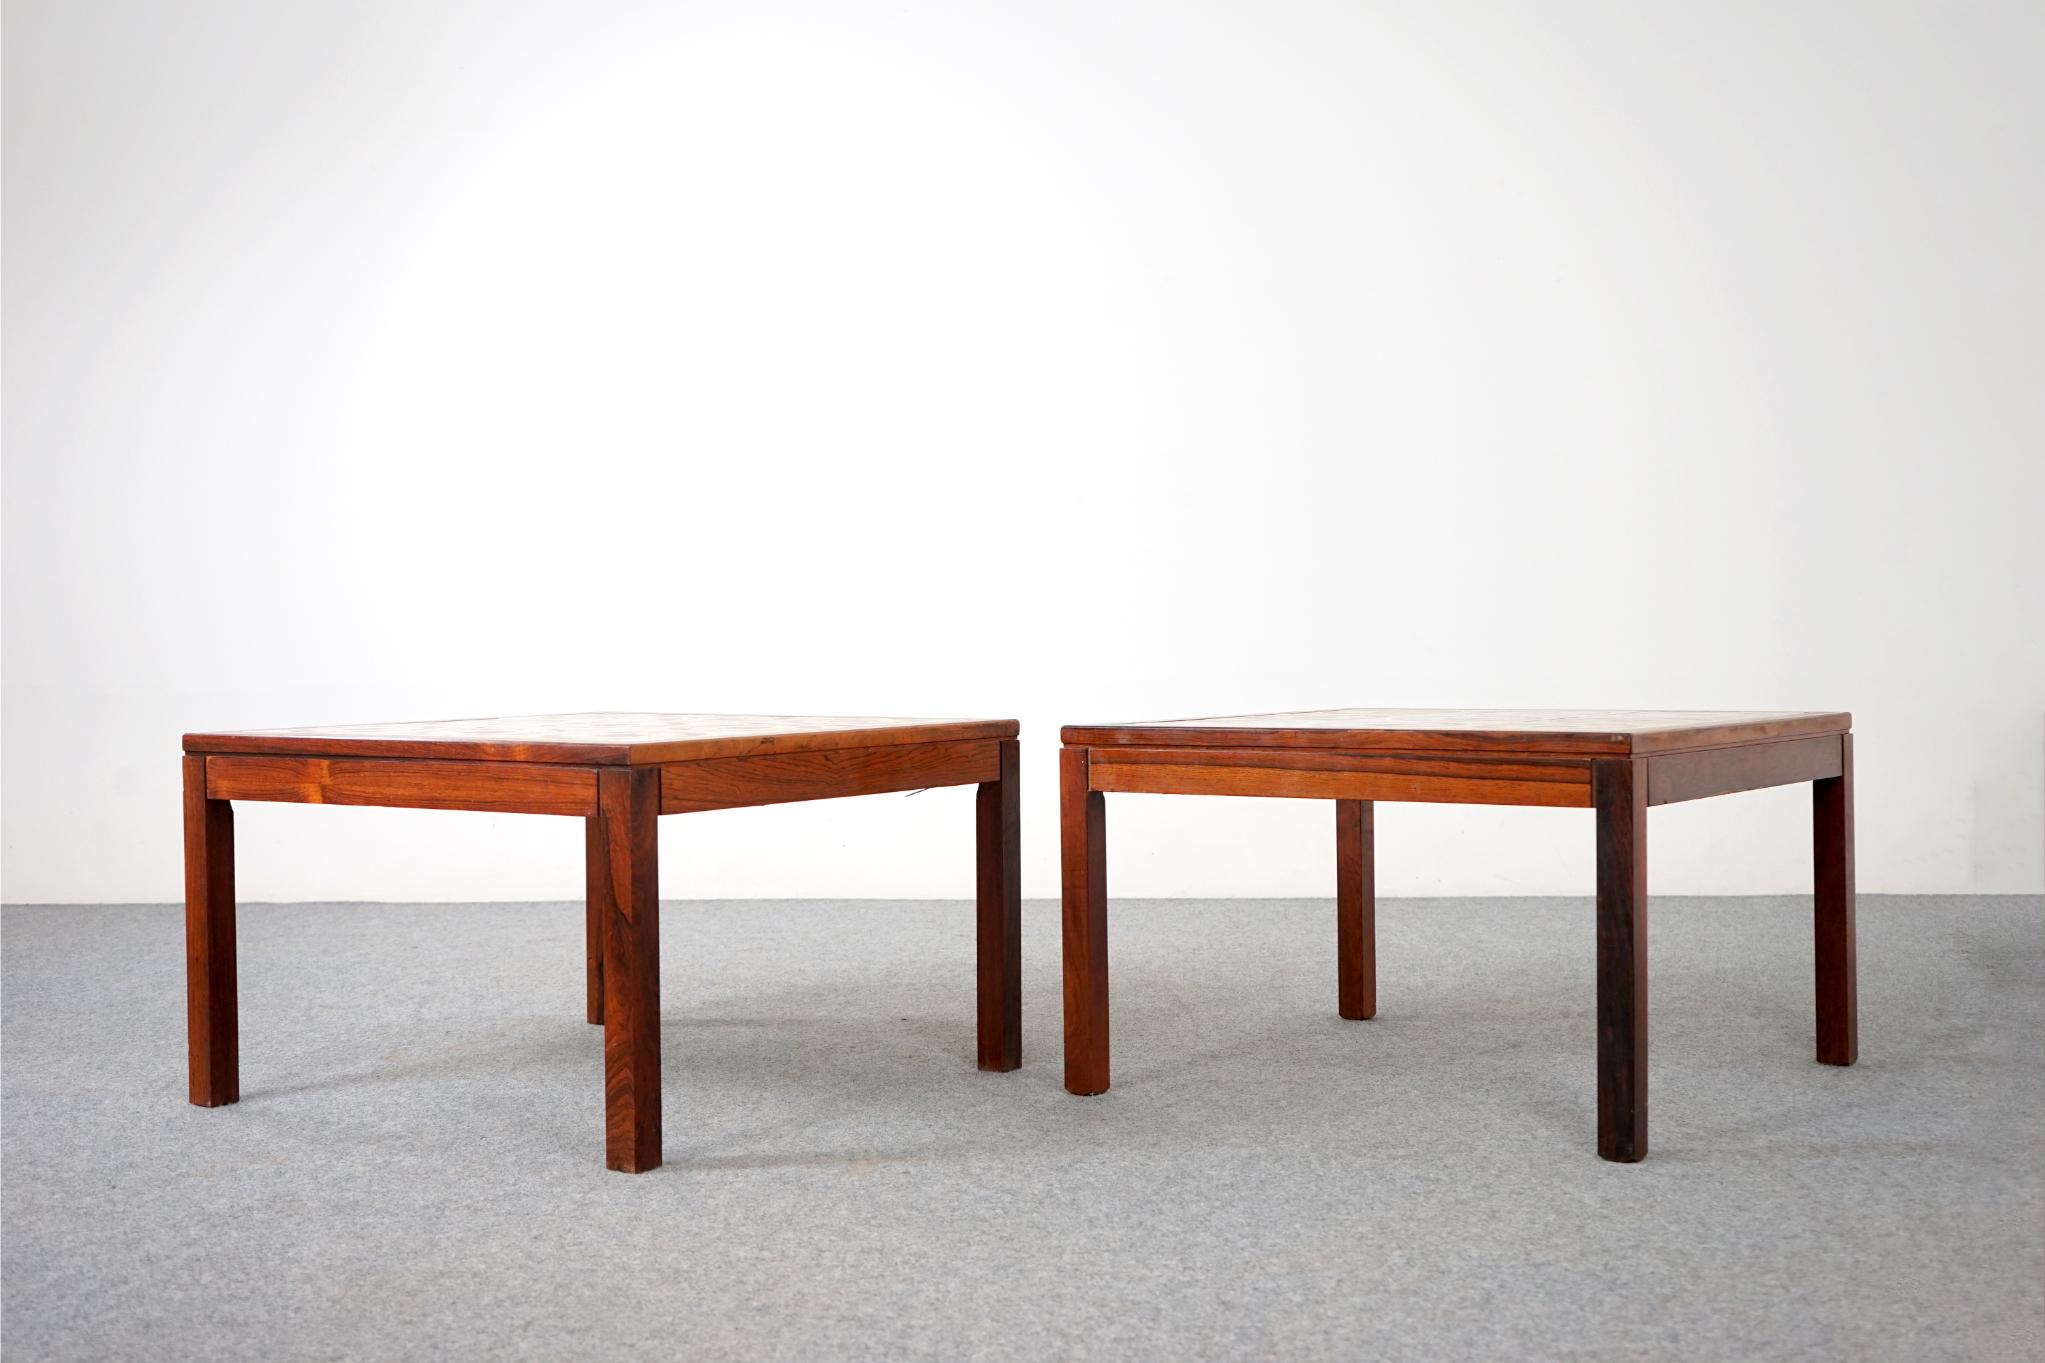 Pair of Danish Mid-Century Modern Rosewood & Tile Side Tables 1